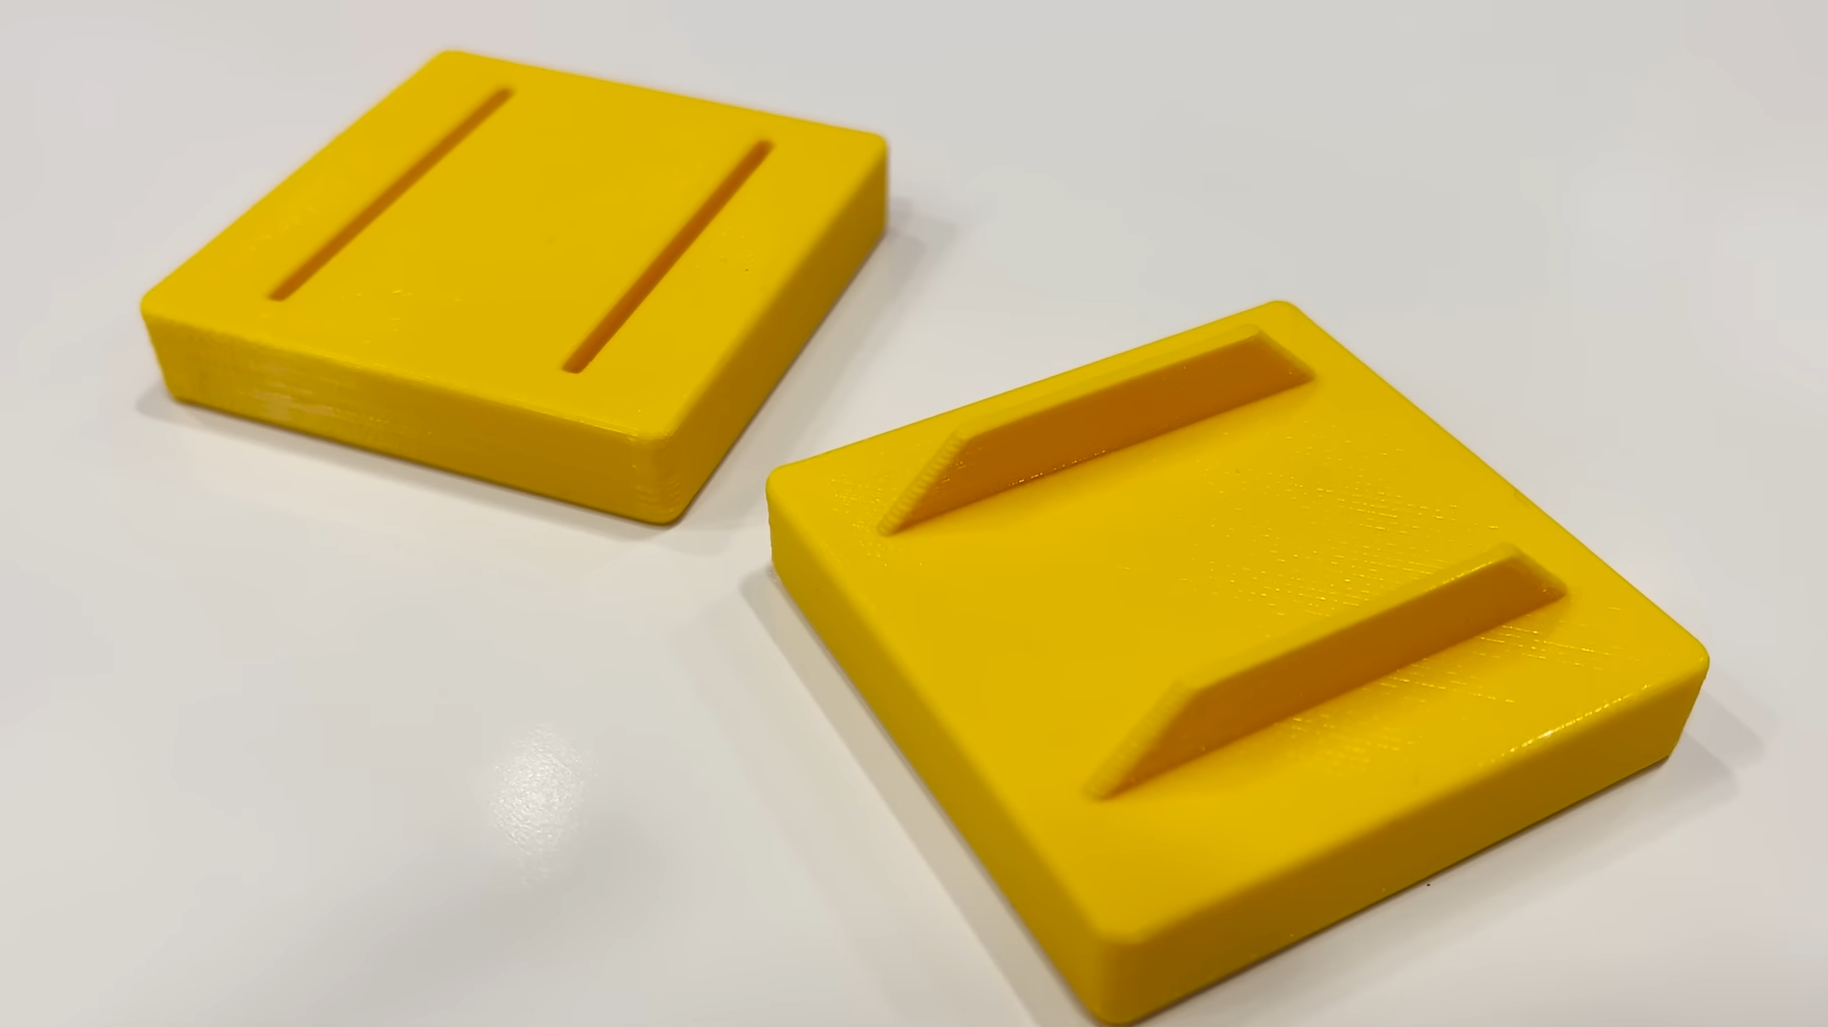 Alternatives to pins and holes for 3D printed assemblies